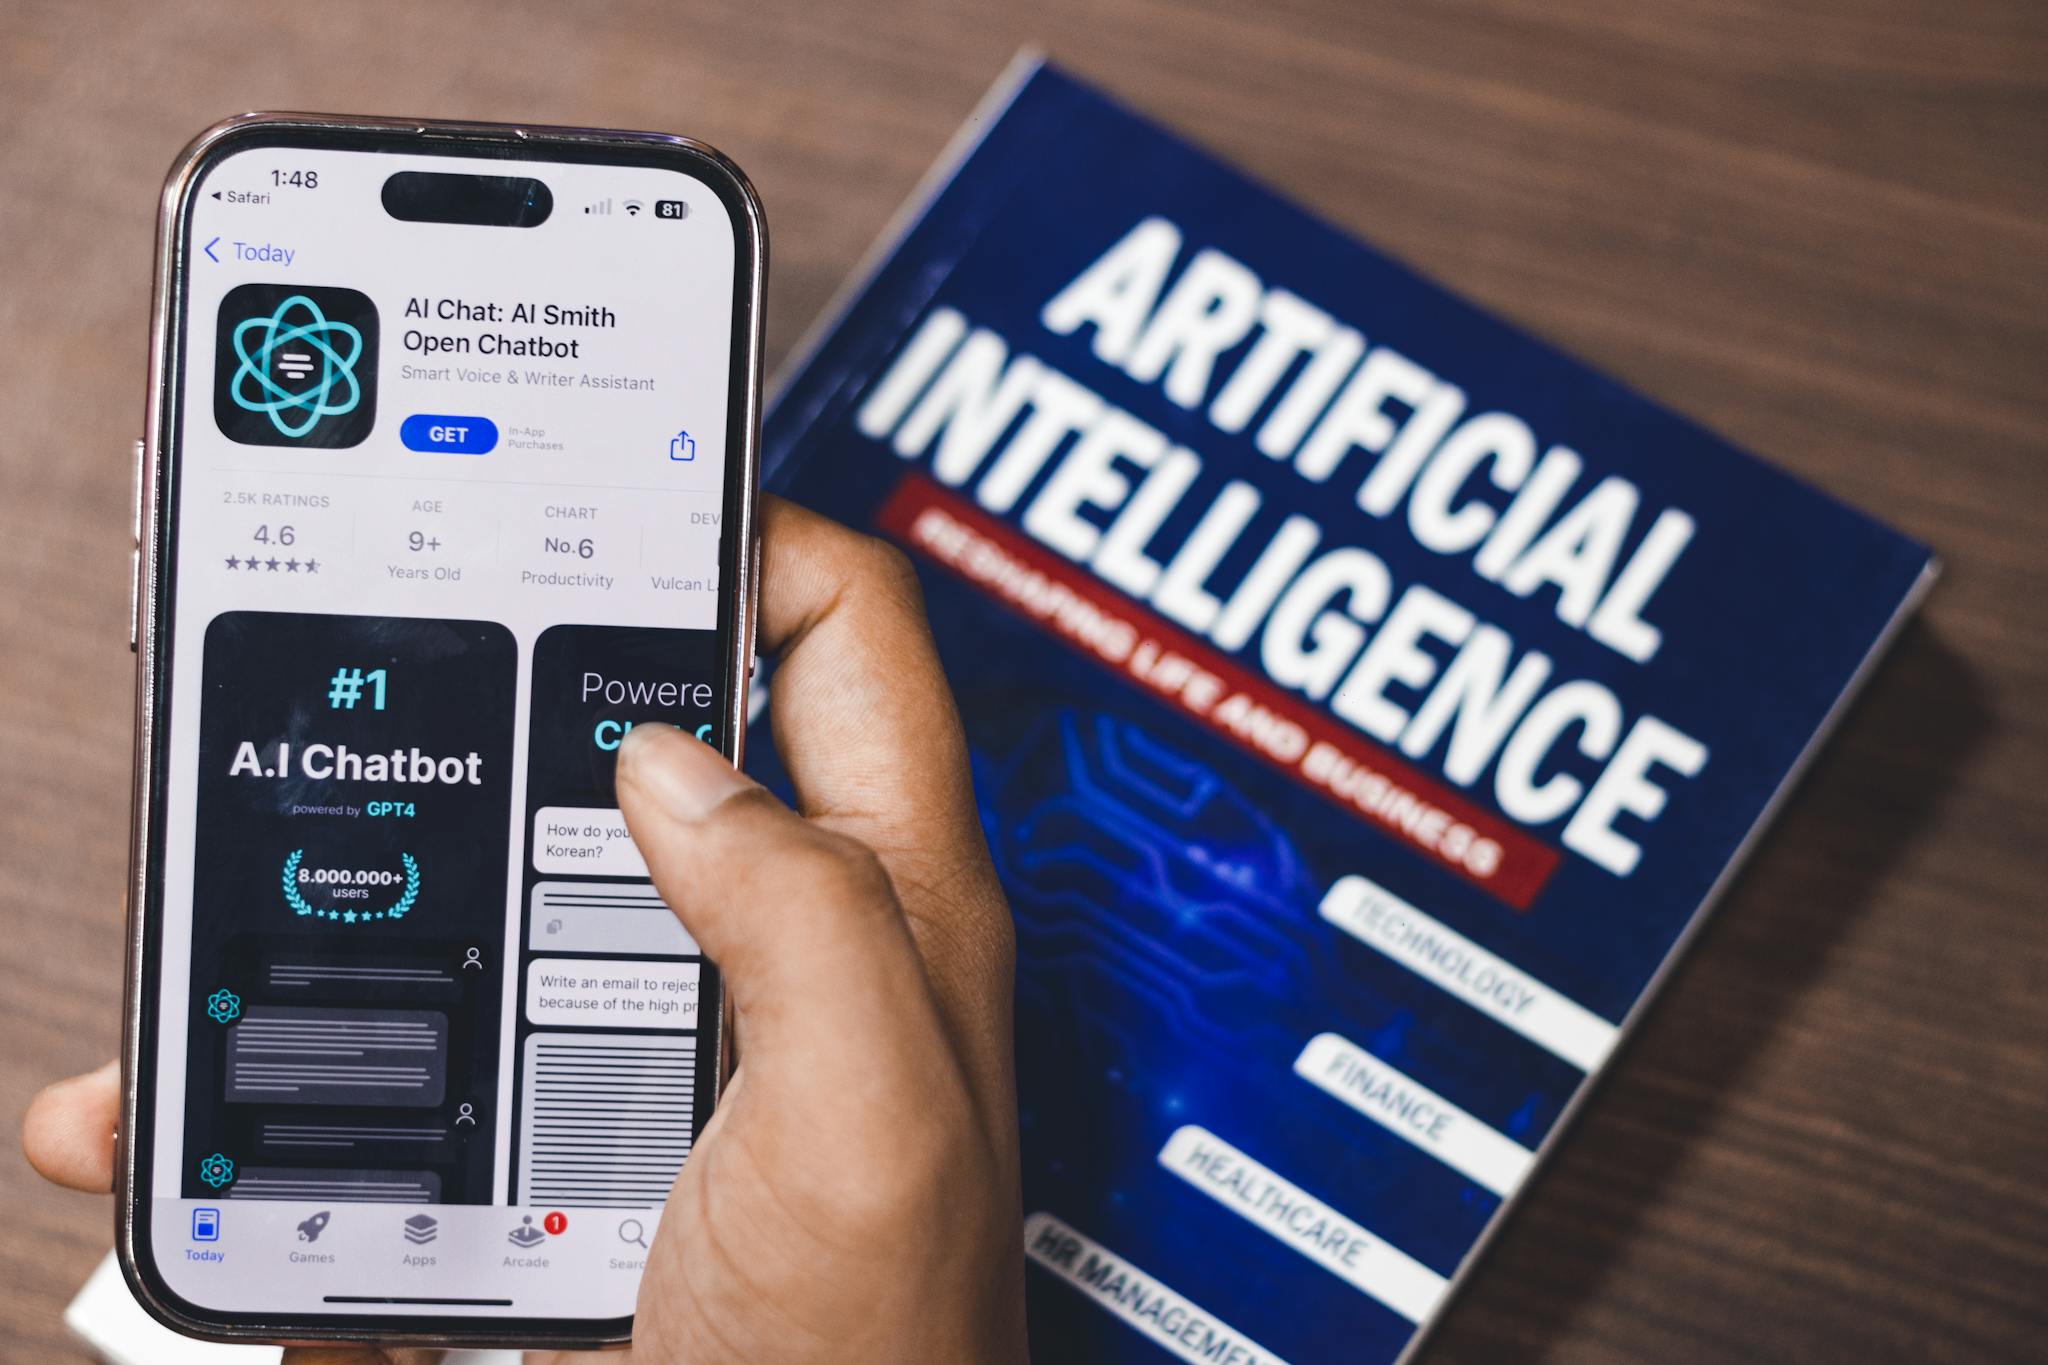 Webpage of Ai Chatbot, a prototype AI Smith Open chatbot, is seen on the website of OpenAI, on a apple smartphone. Examples, capabilities, and limitations are shown.